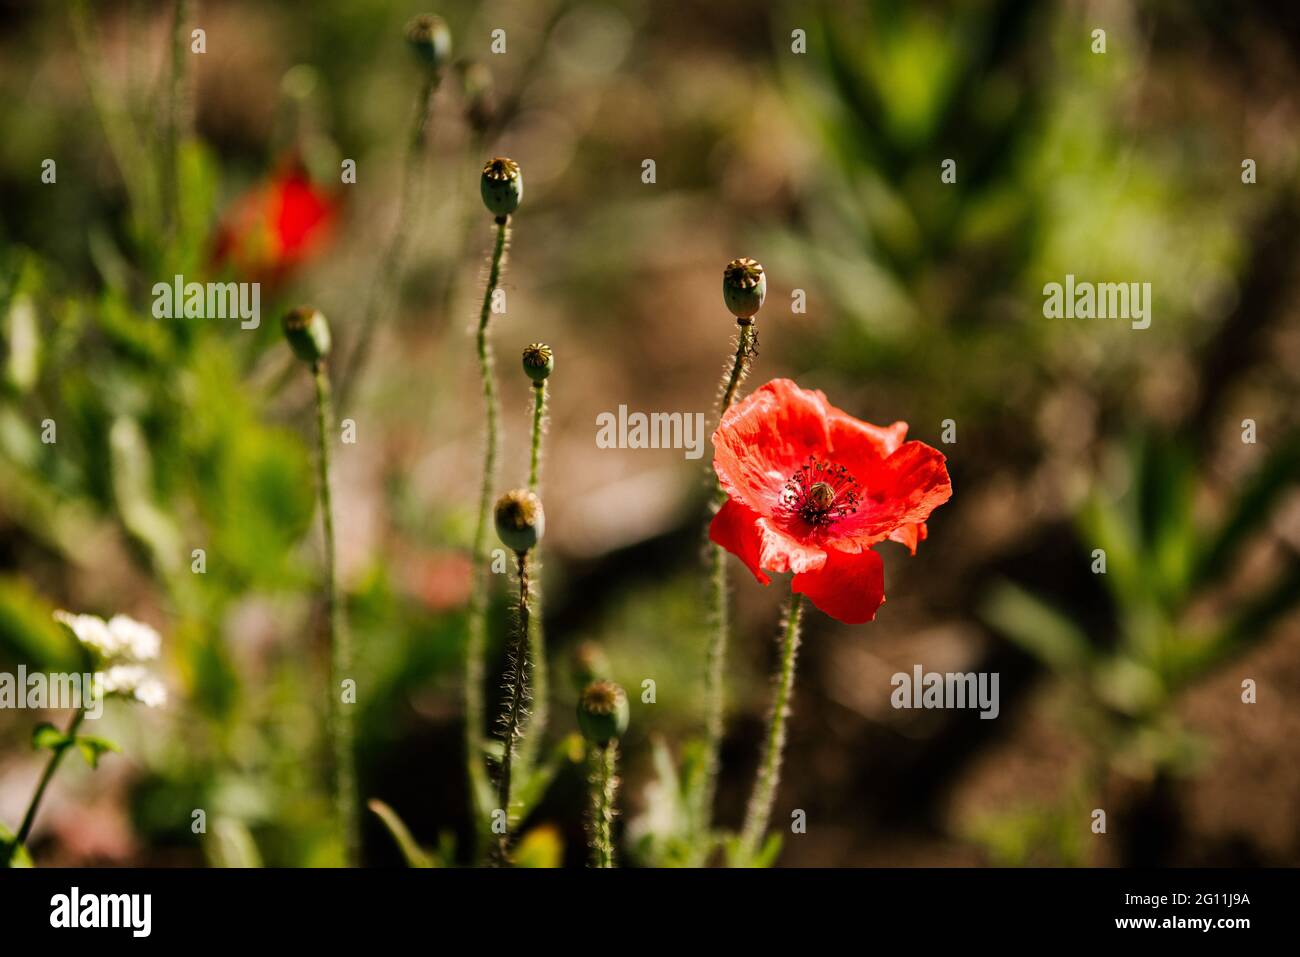 Canada, Ontario, Red poppies growing in field Stock Photo